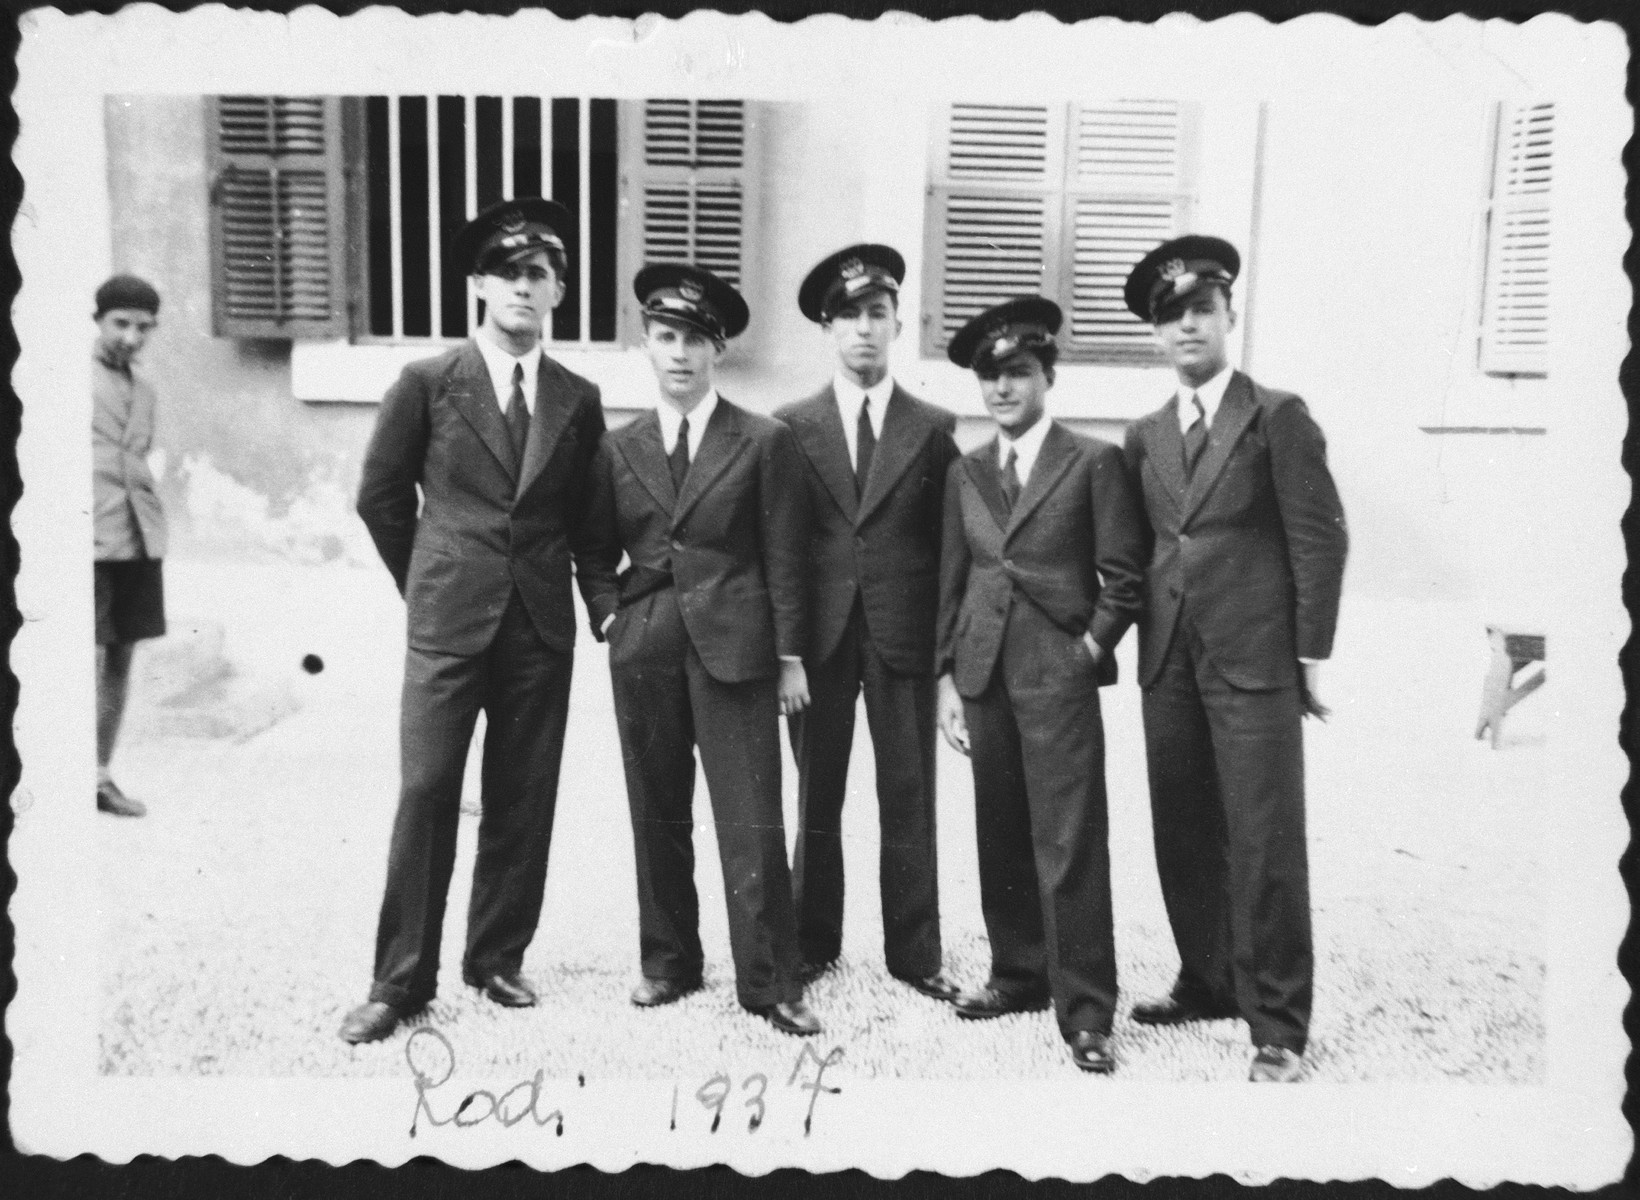 Students at the Rabbinical College in Rhodes in uniform.

Among those pictured is Haim Menasce (center).